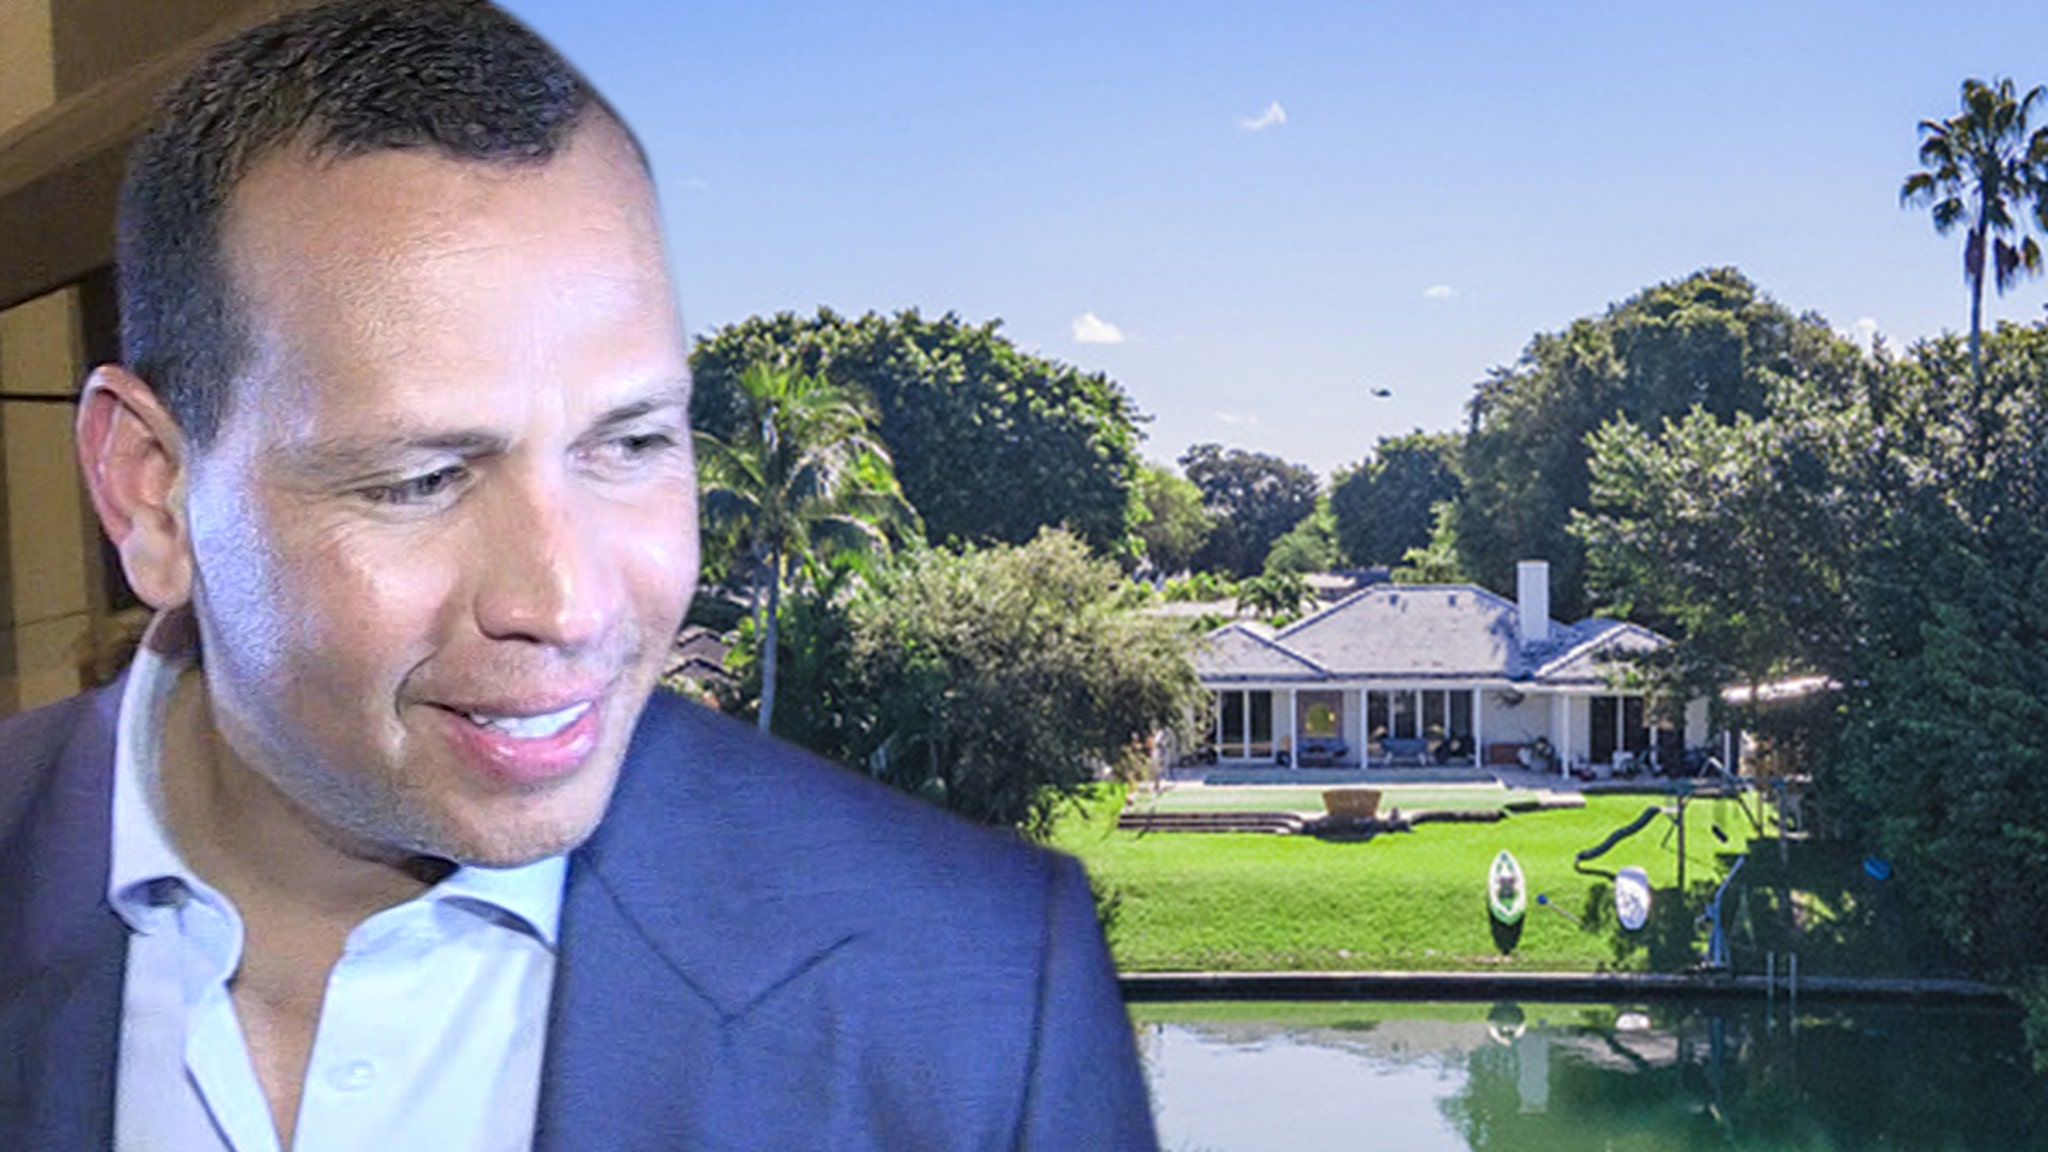 A-Rod Sells Bay Point Investment Property for .3M